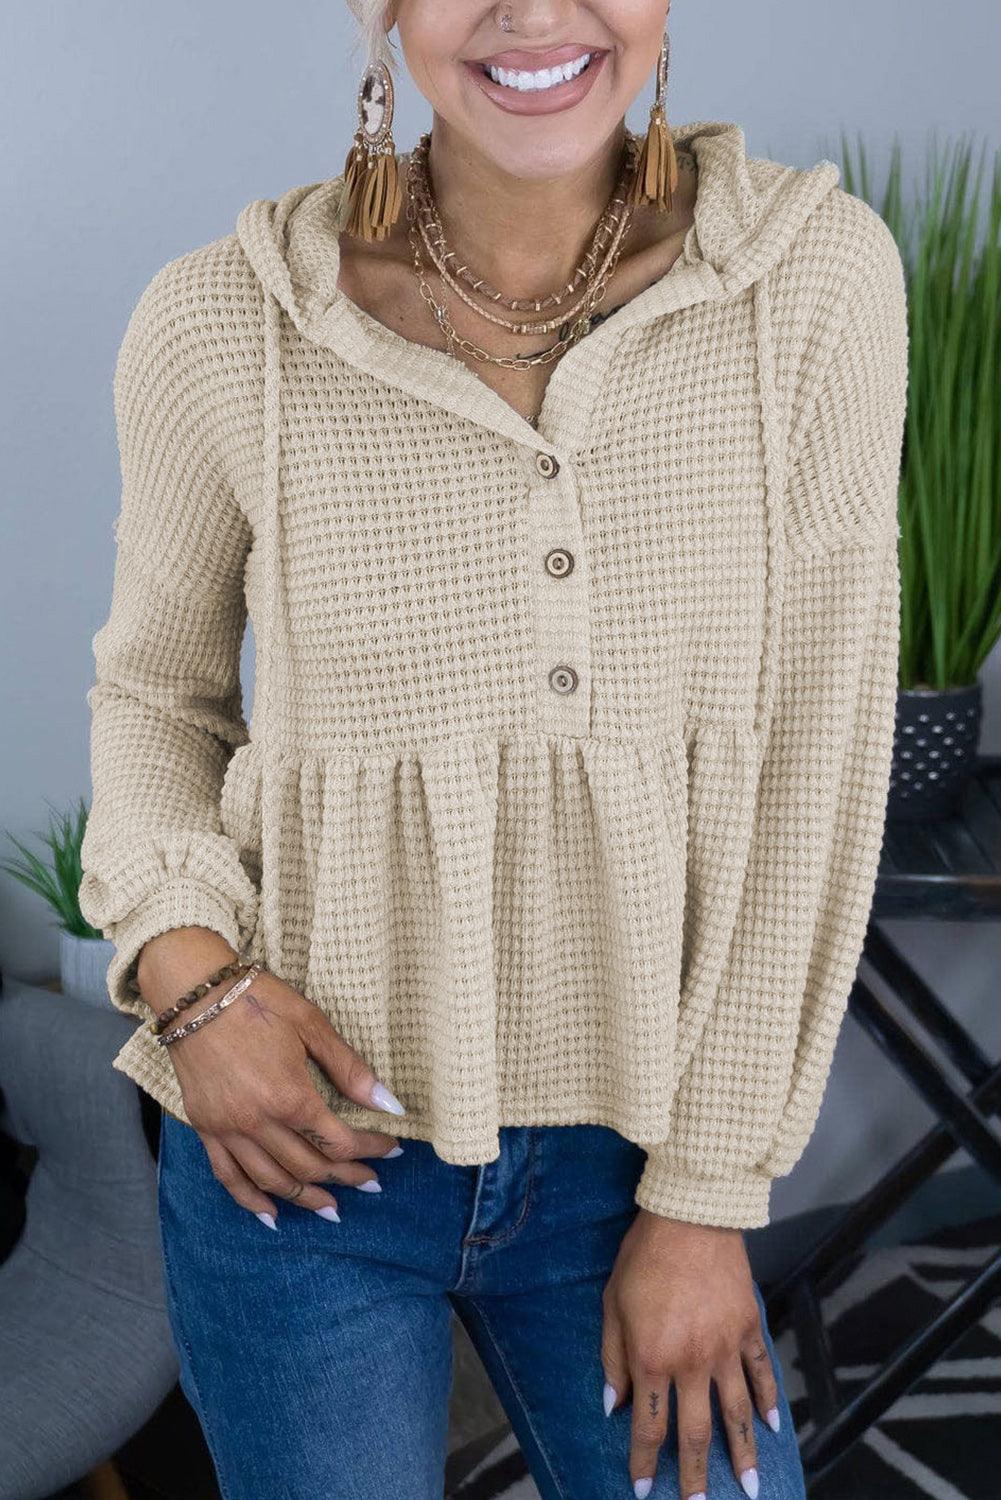 Waffle Knit Buttons Ruffled Hooded Top - L & M Kee, LLC